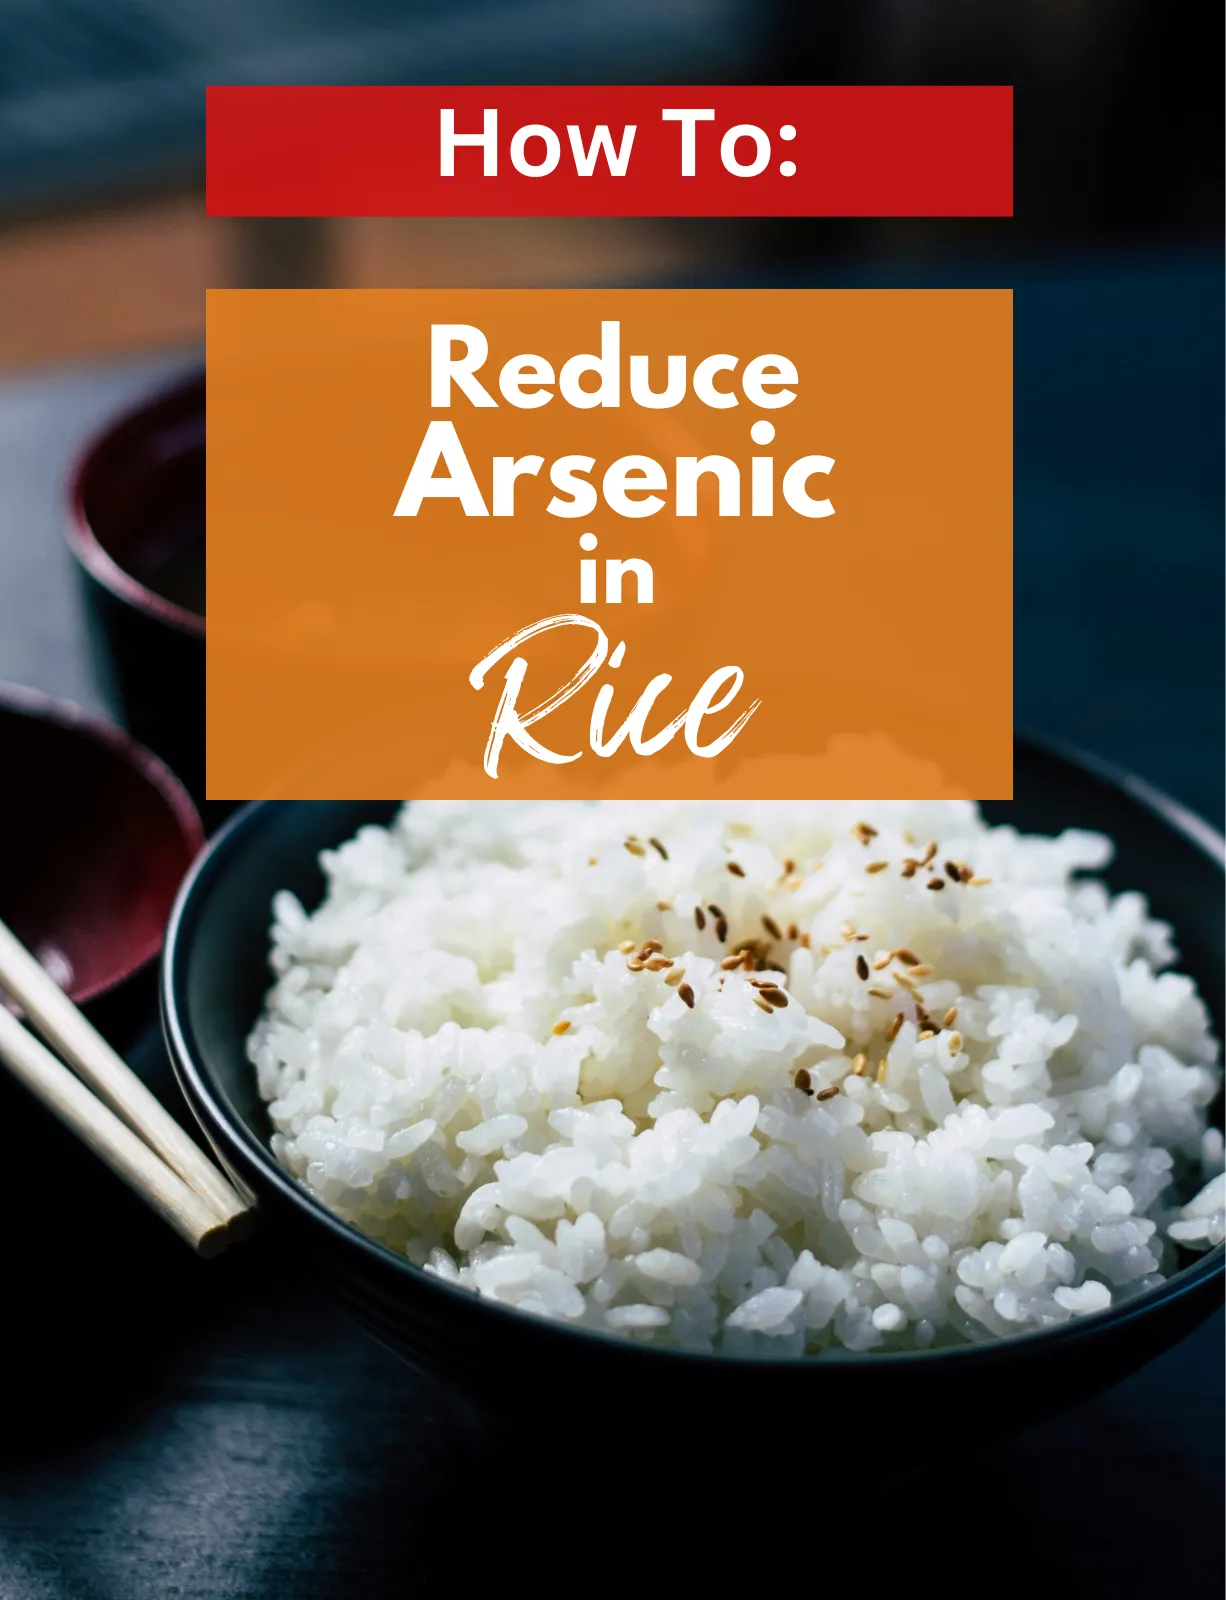 How To Reduce Arsenic in Rice